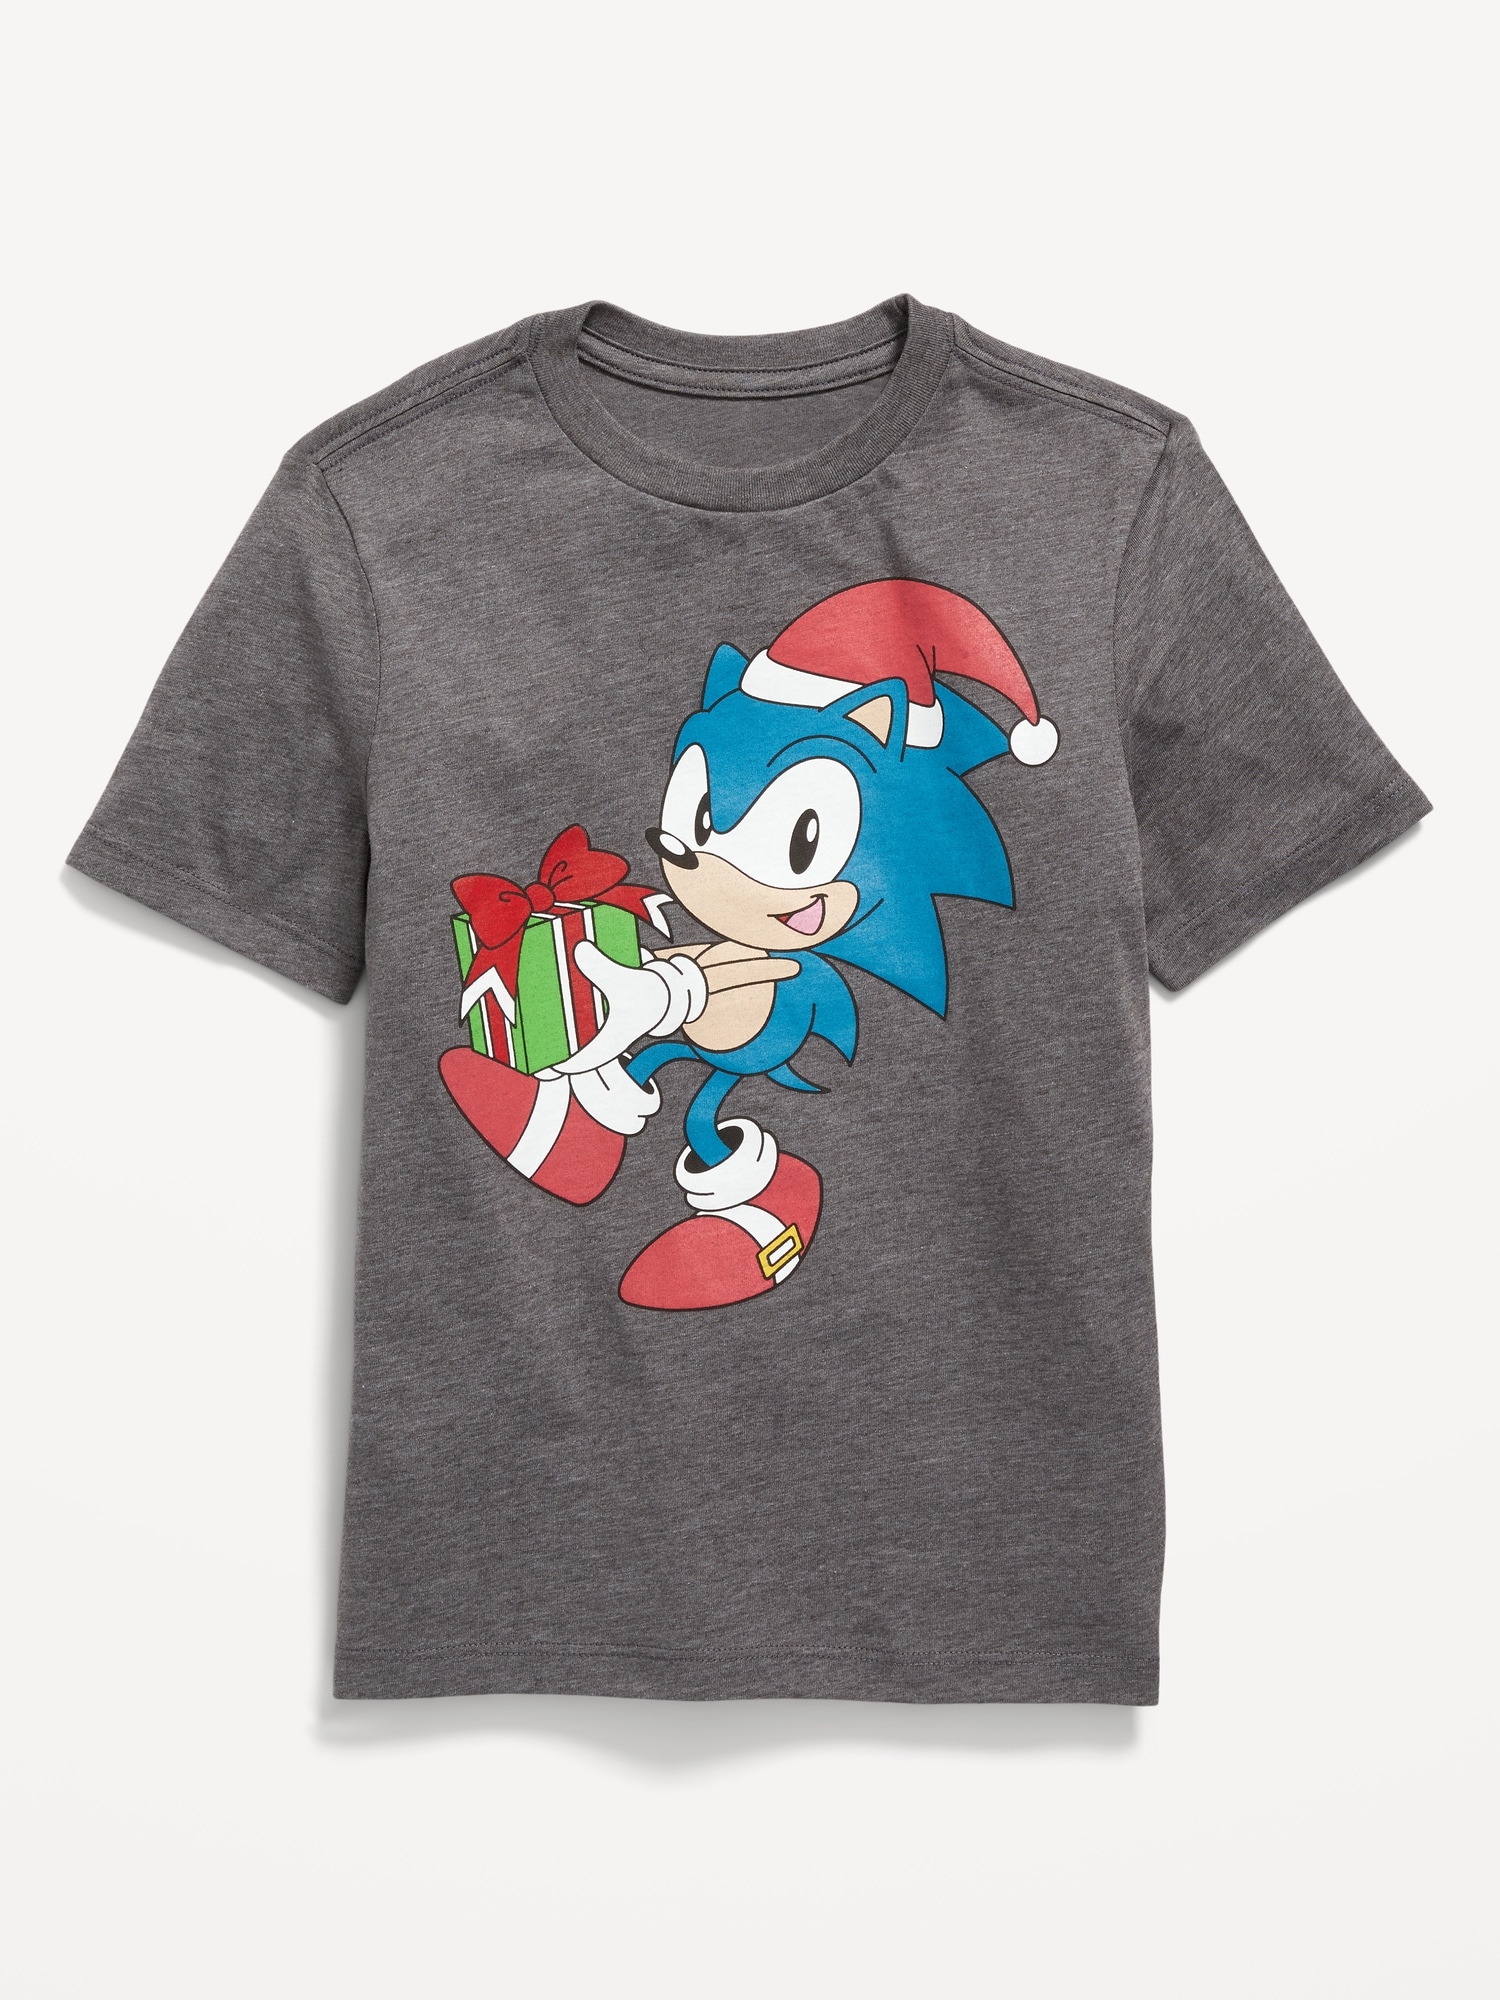 Sonic The Hedgehog™ Gender-Neutral Holiday T-Shirt for Kids